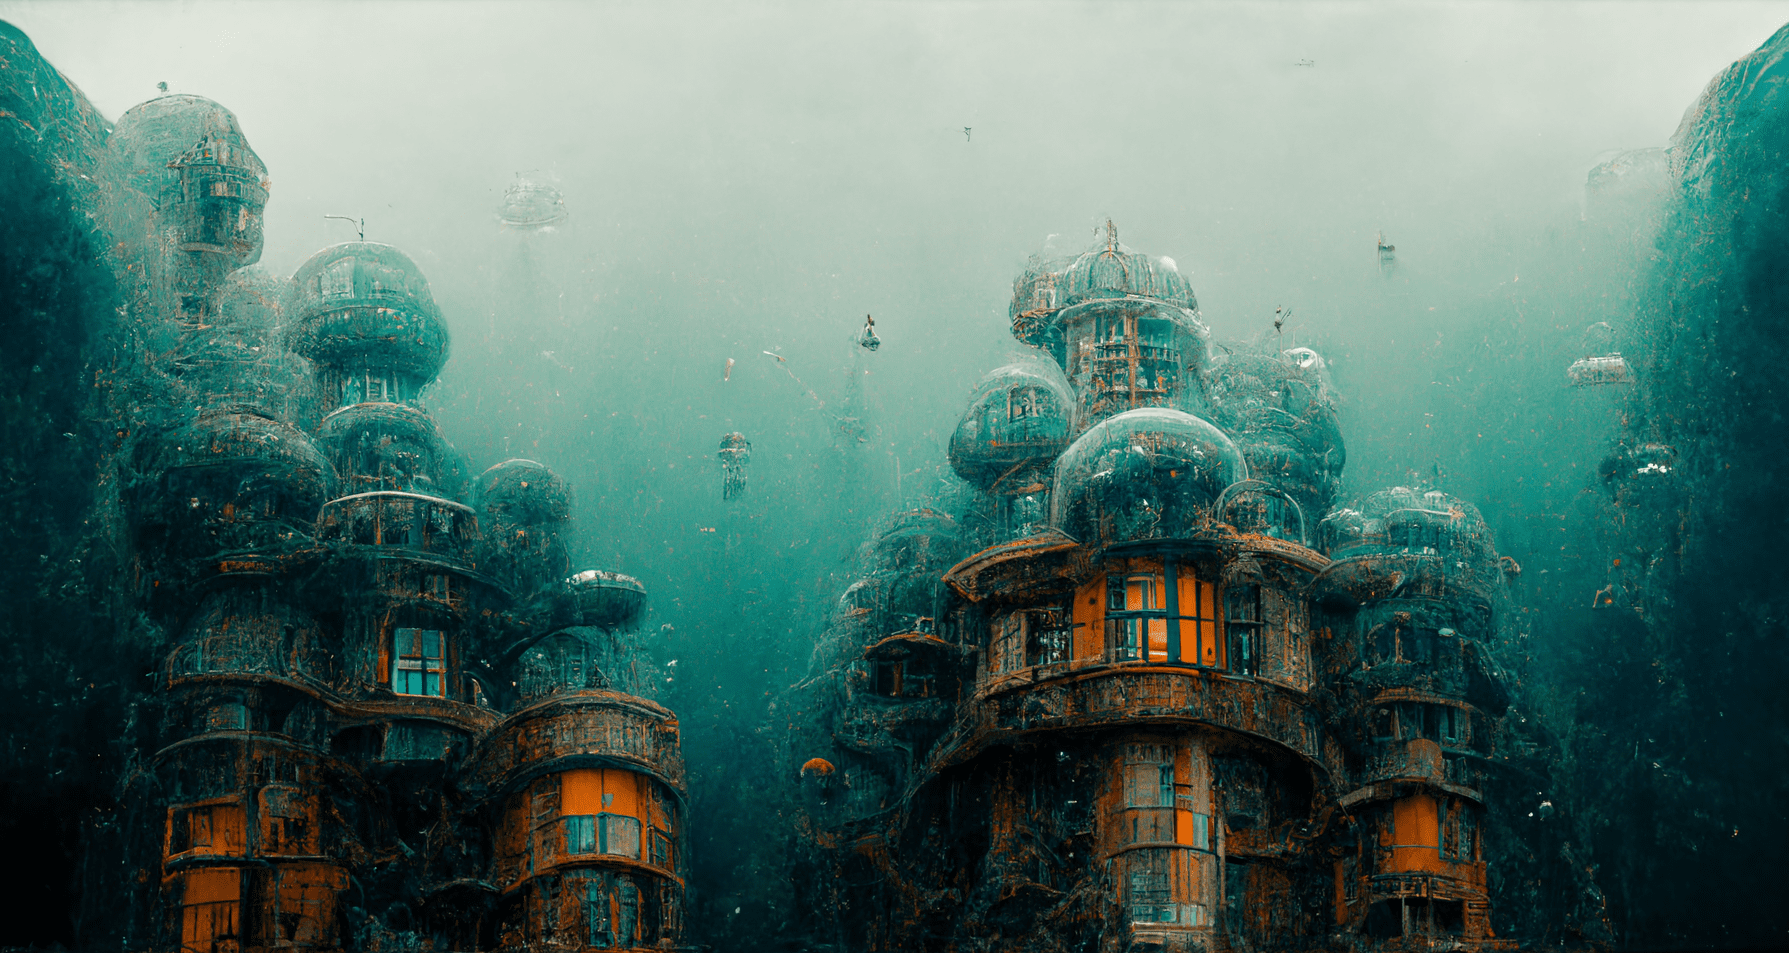 I strive just to say I’m alright – Aquapunk underwater city